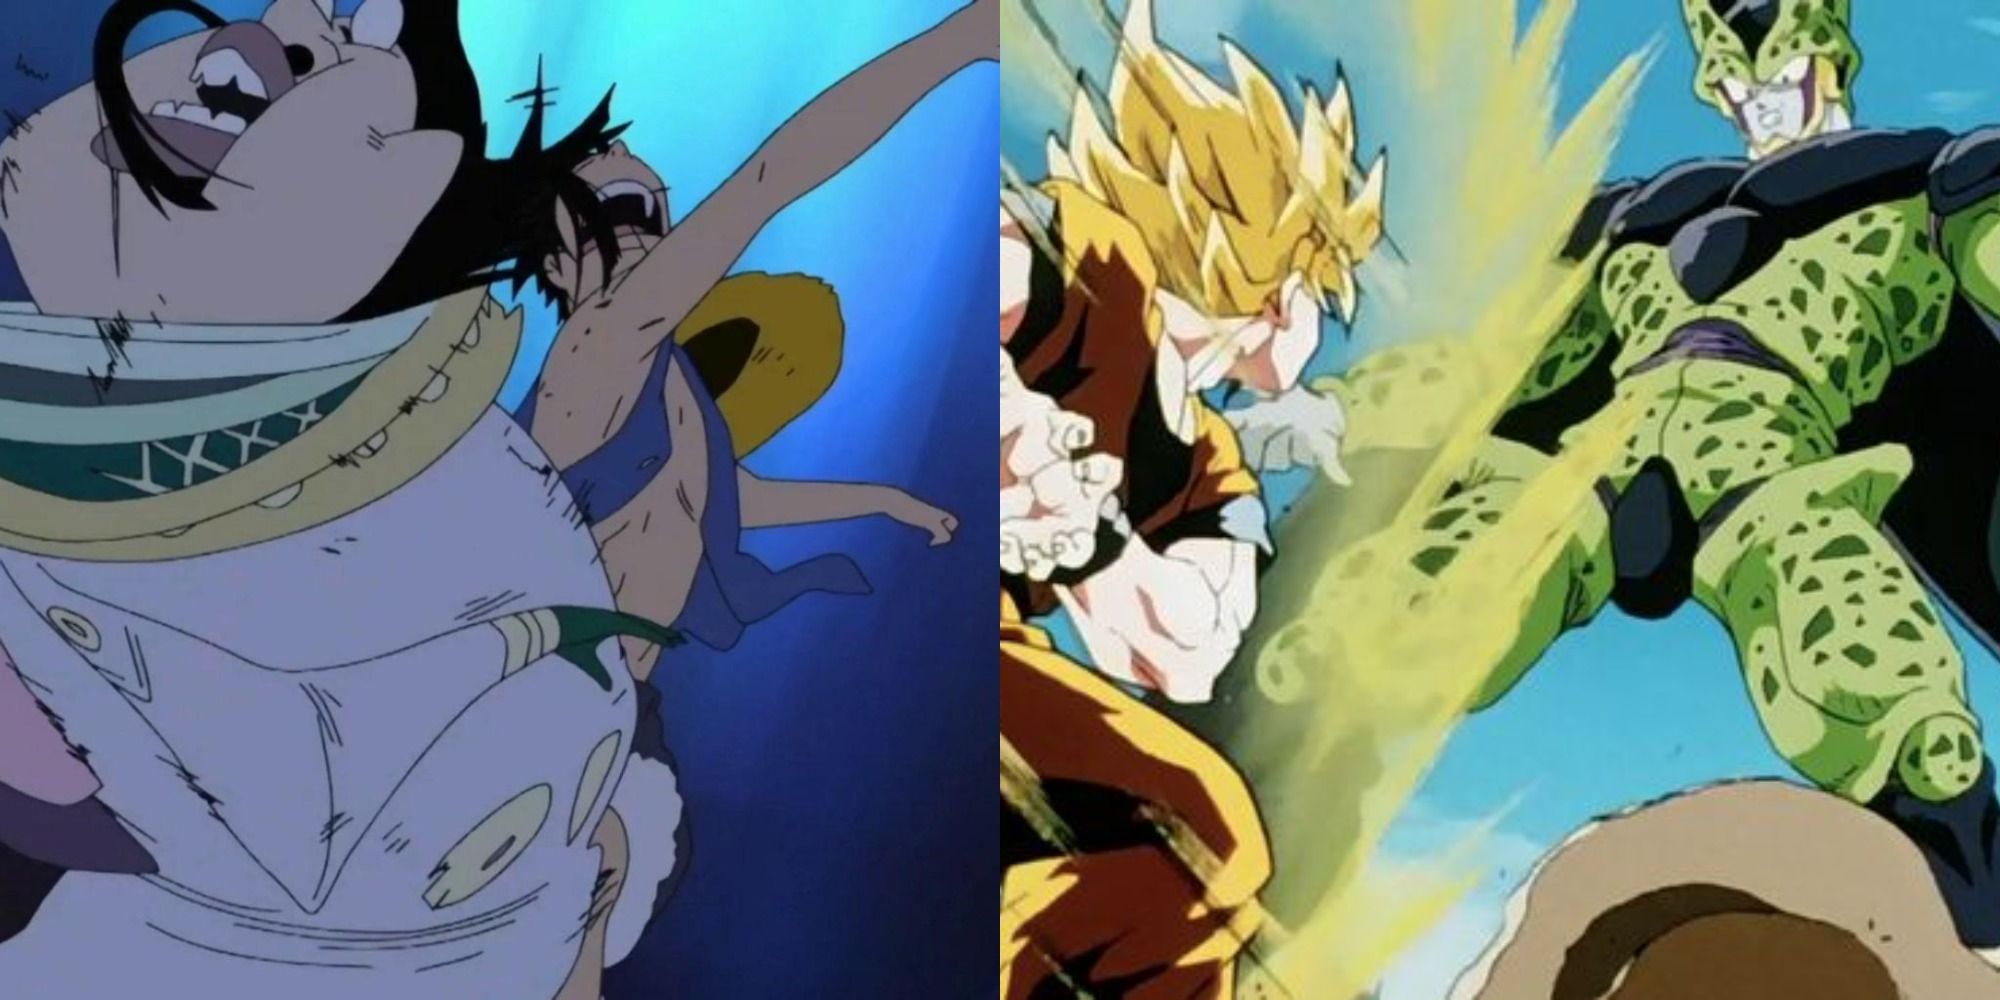 Split image depicting Luffy punching the Celestial Dragon, and Goku battling Perfect Cell